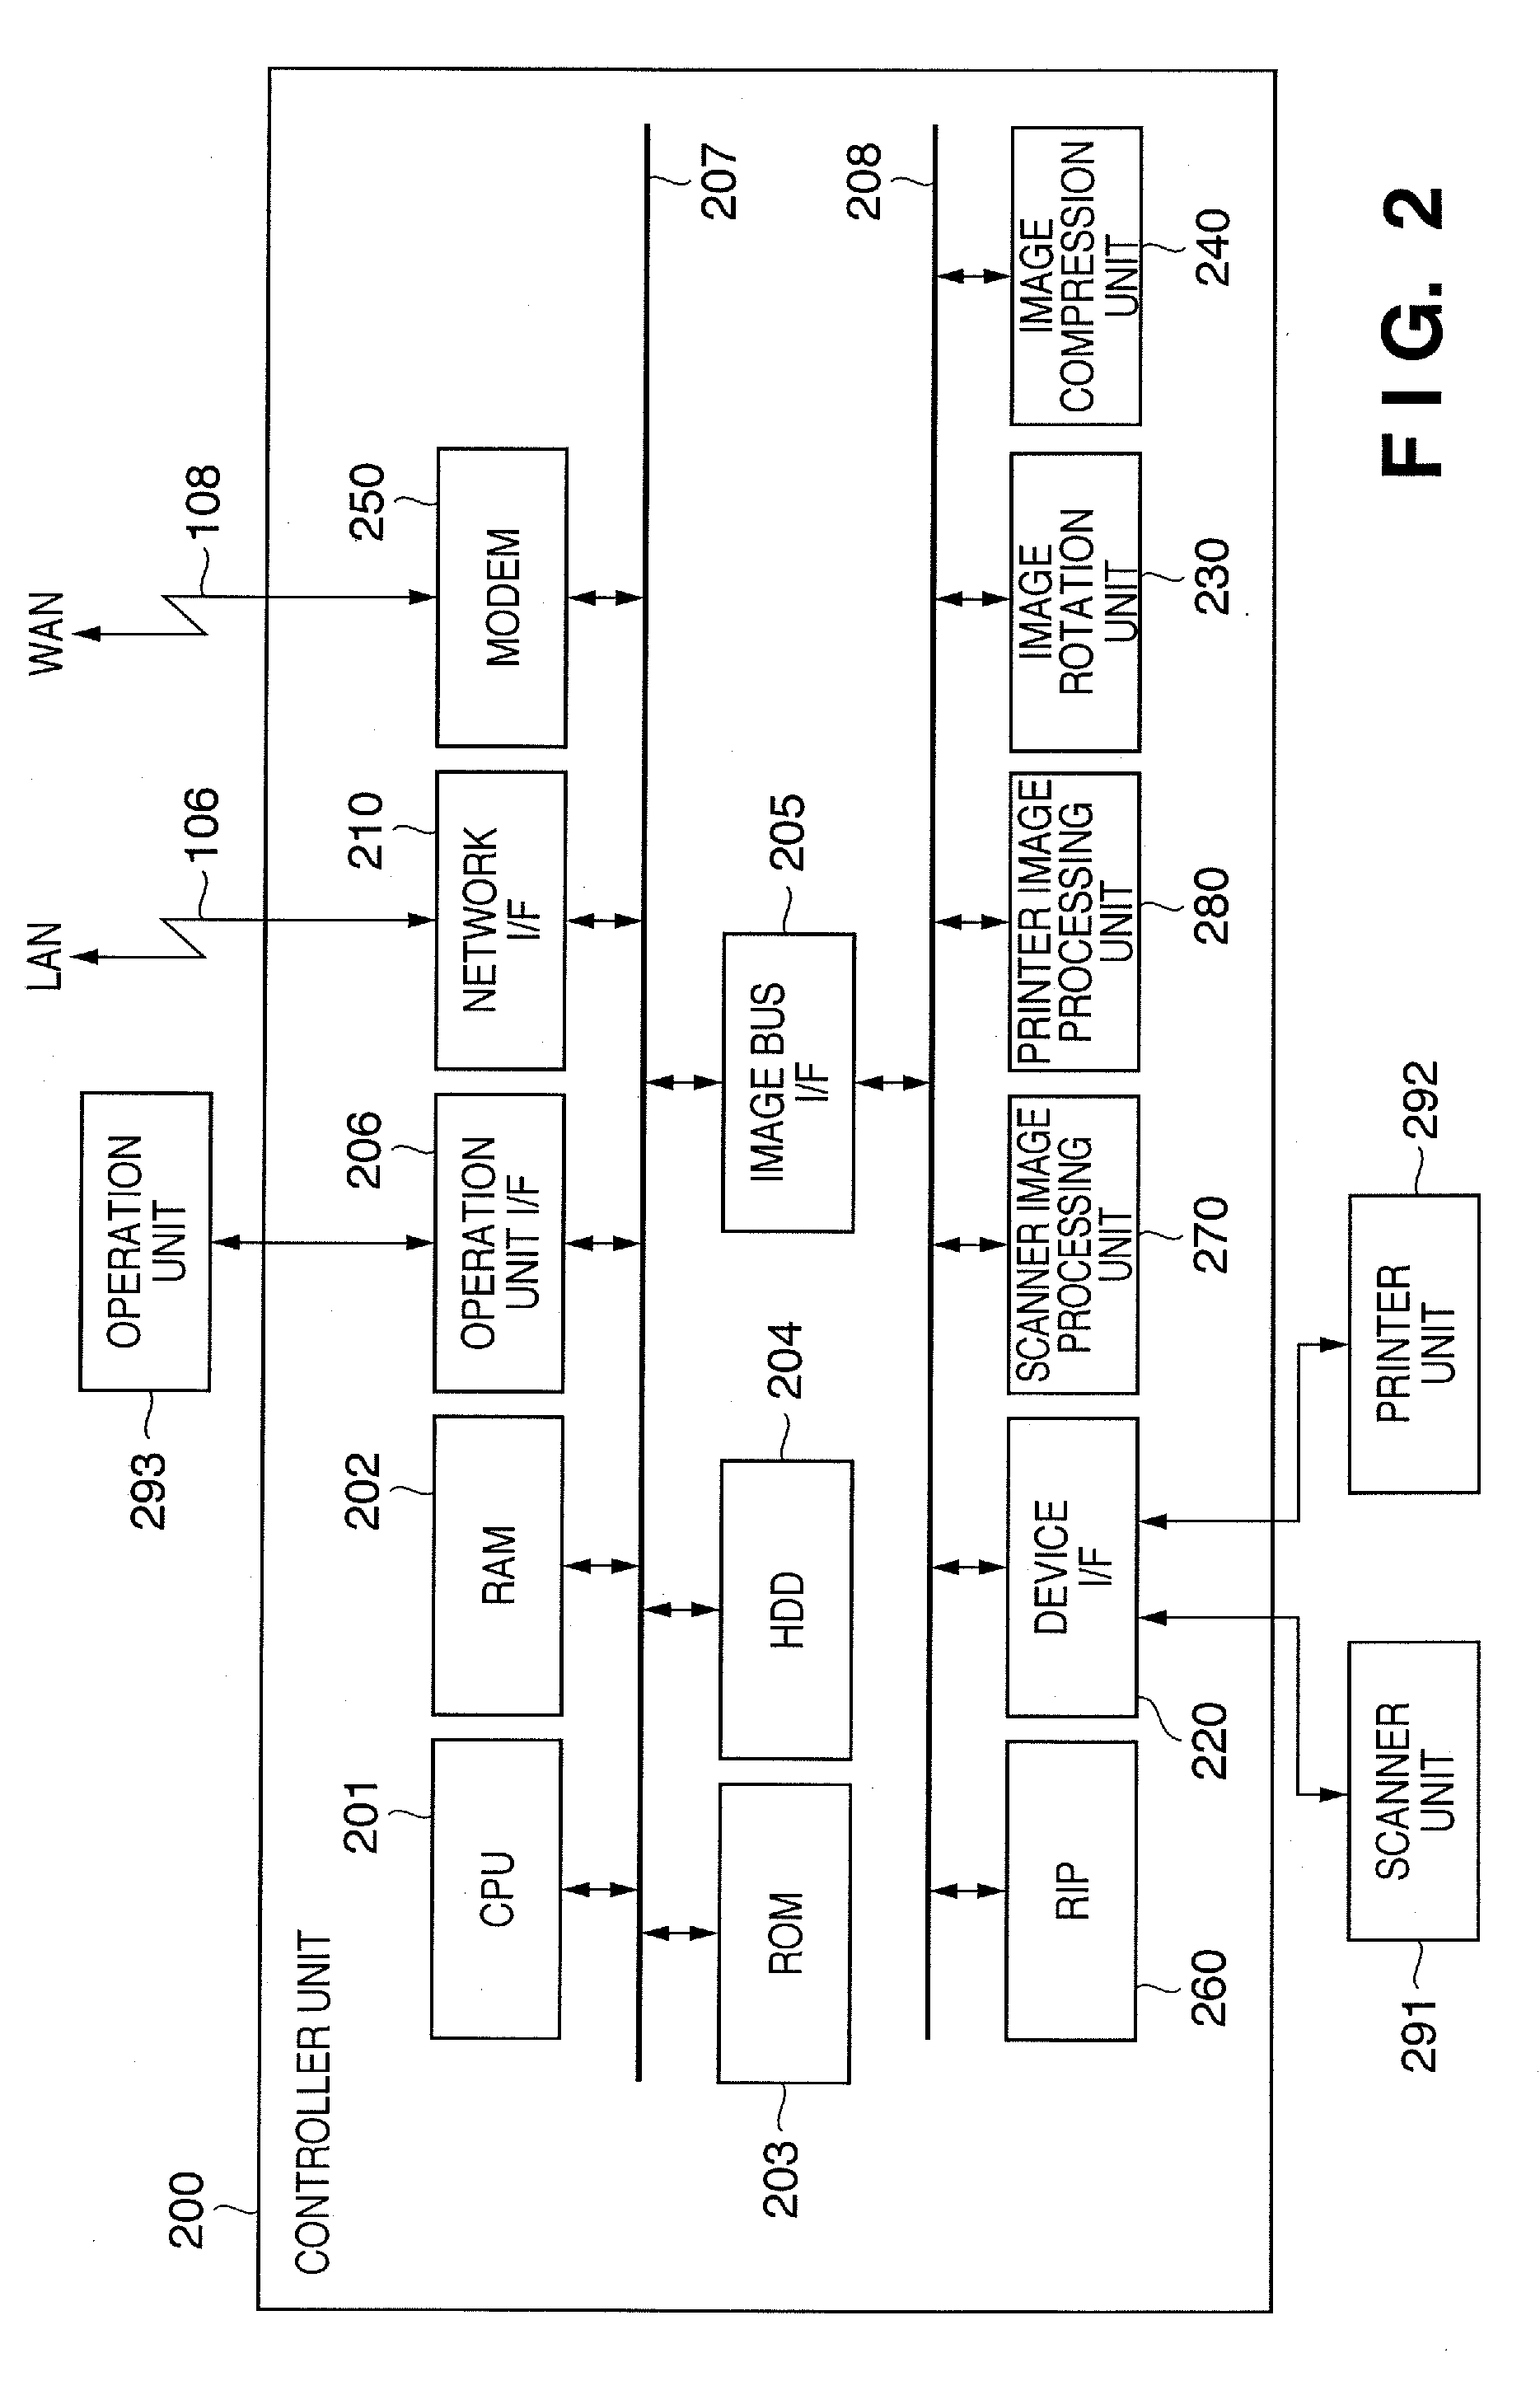 Image forming apparatus and information processing method